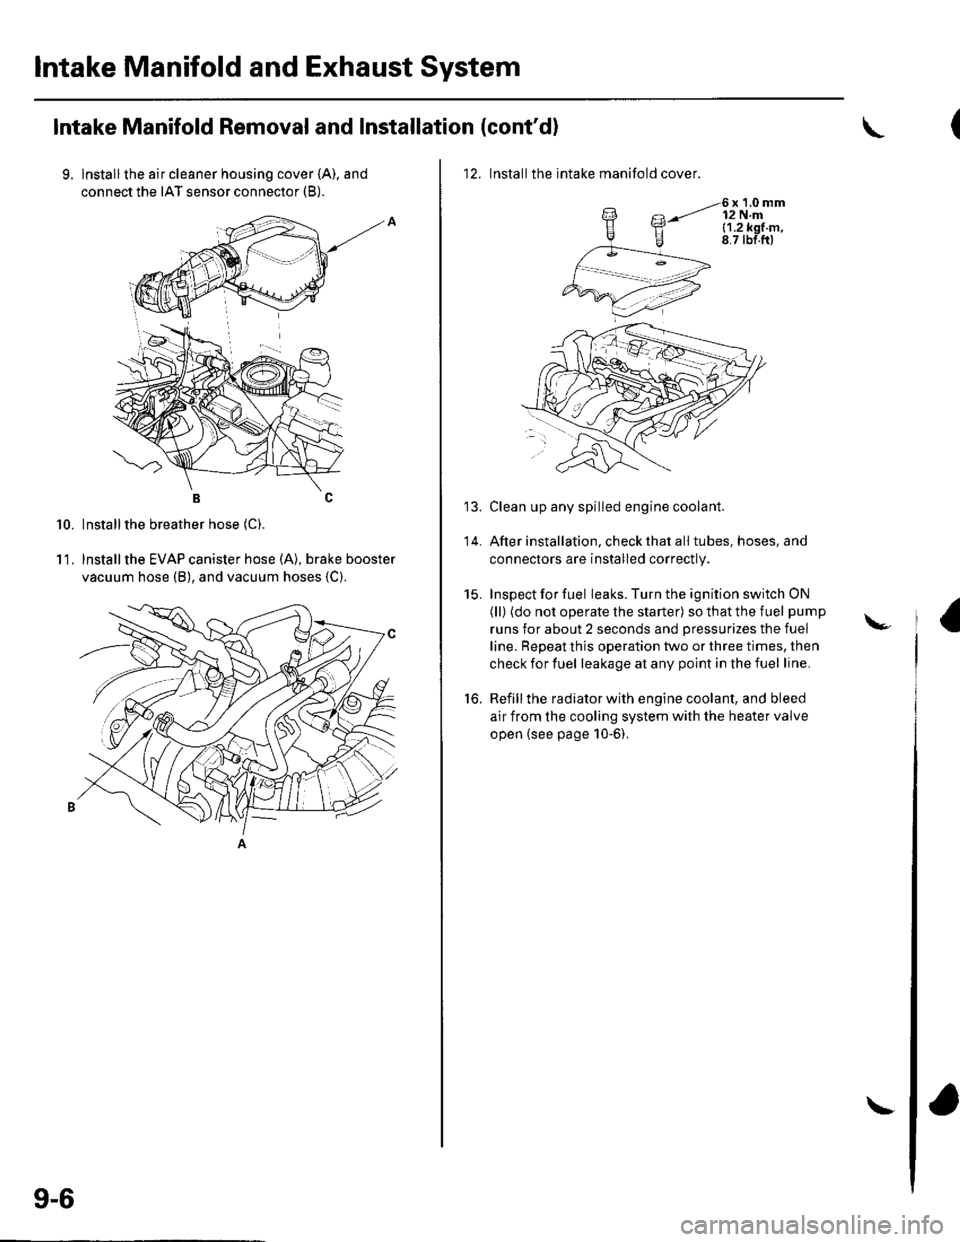 HONDA CIVIC 2002 7.G Workshop Manual lntake Manifold and Exhaust System
Intake Manifold Removal and Installation (contd)
9. lnstallthe air cleaner housing cover (A), and
connect the IAT sensor connector (B).
BC
Installthe breather hose 